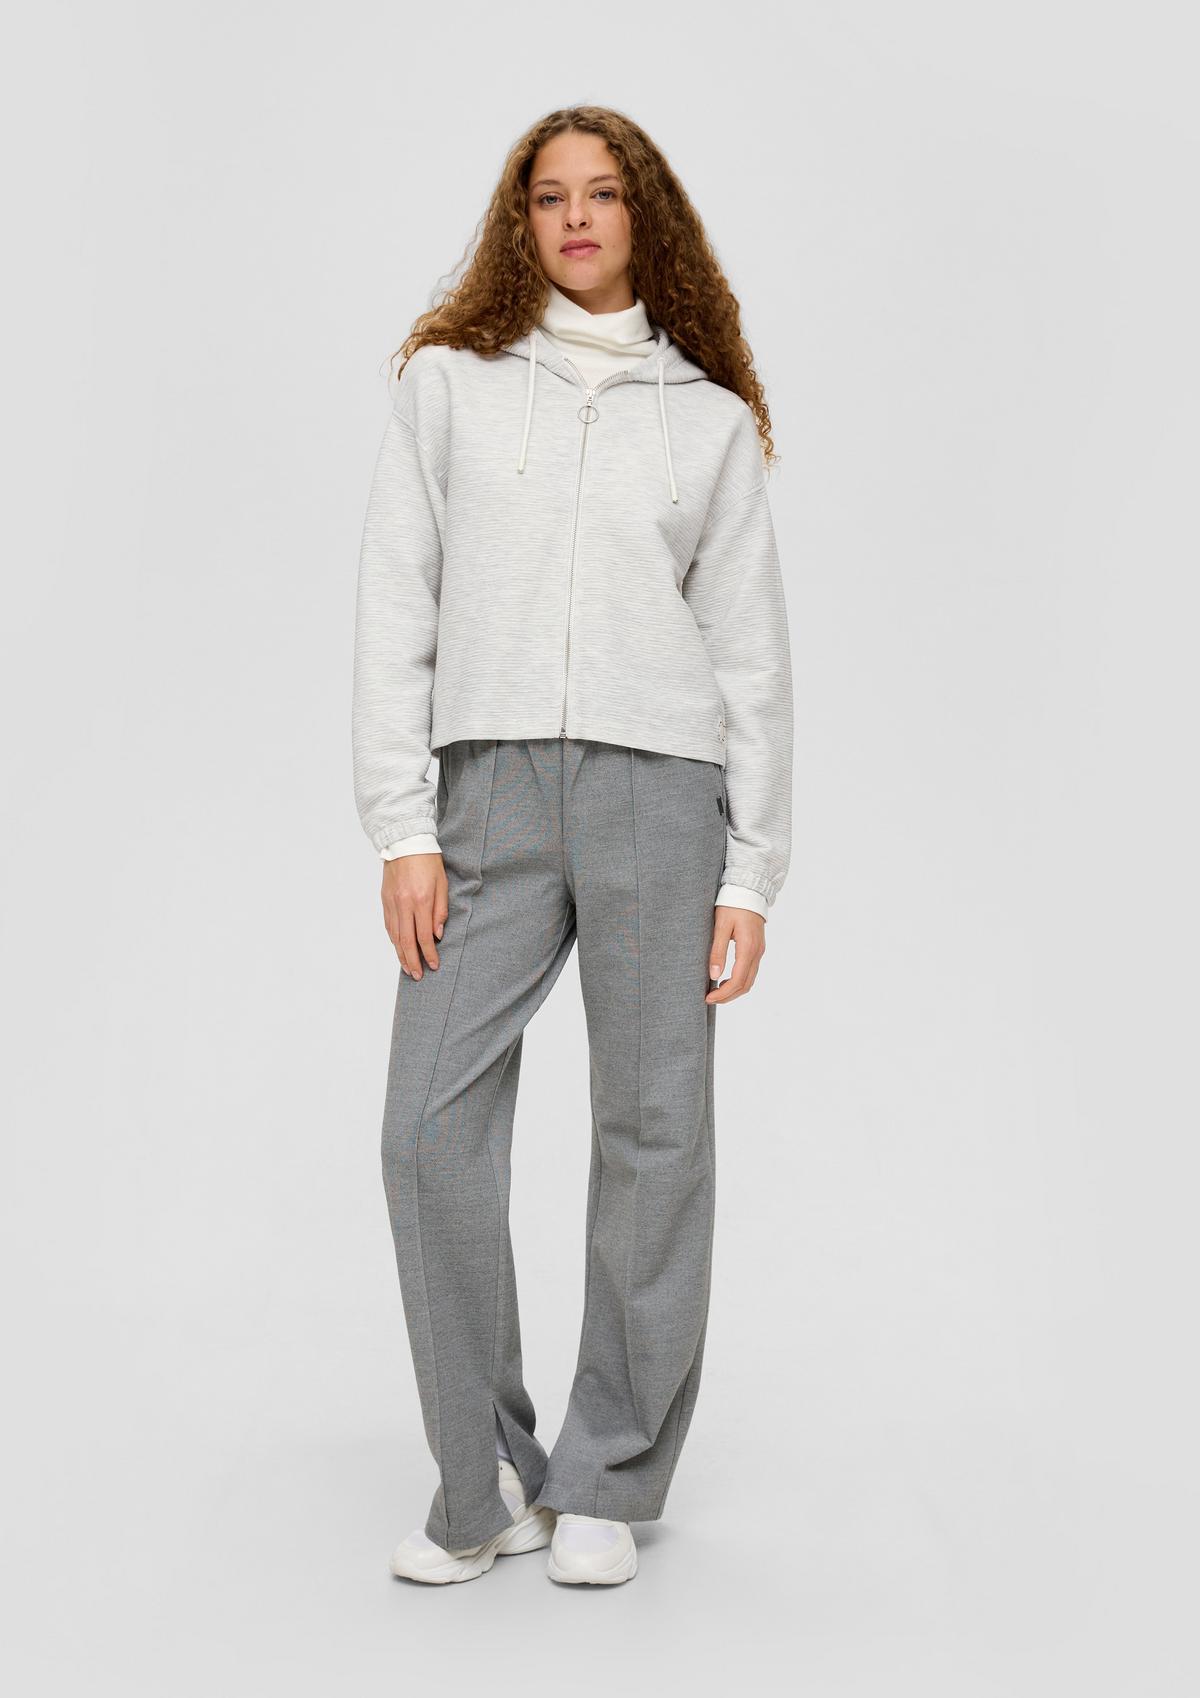 s.Oliver Sweatshirt jacket with a ribbed texture